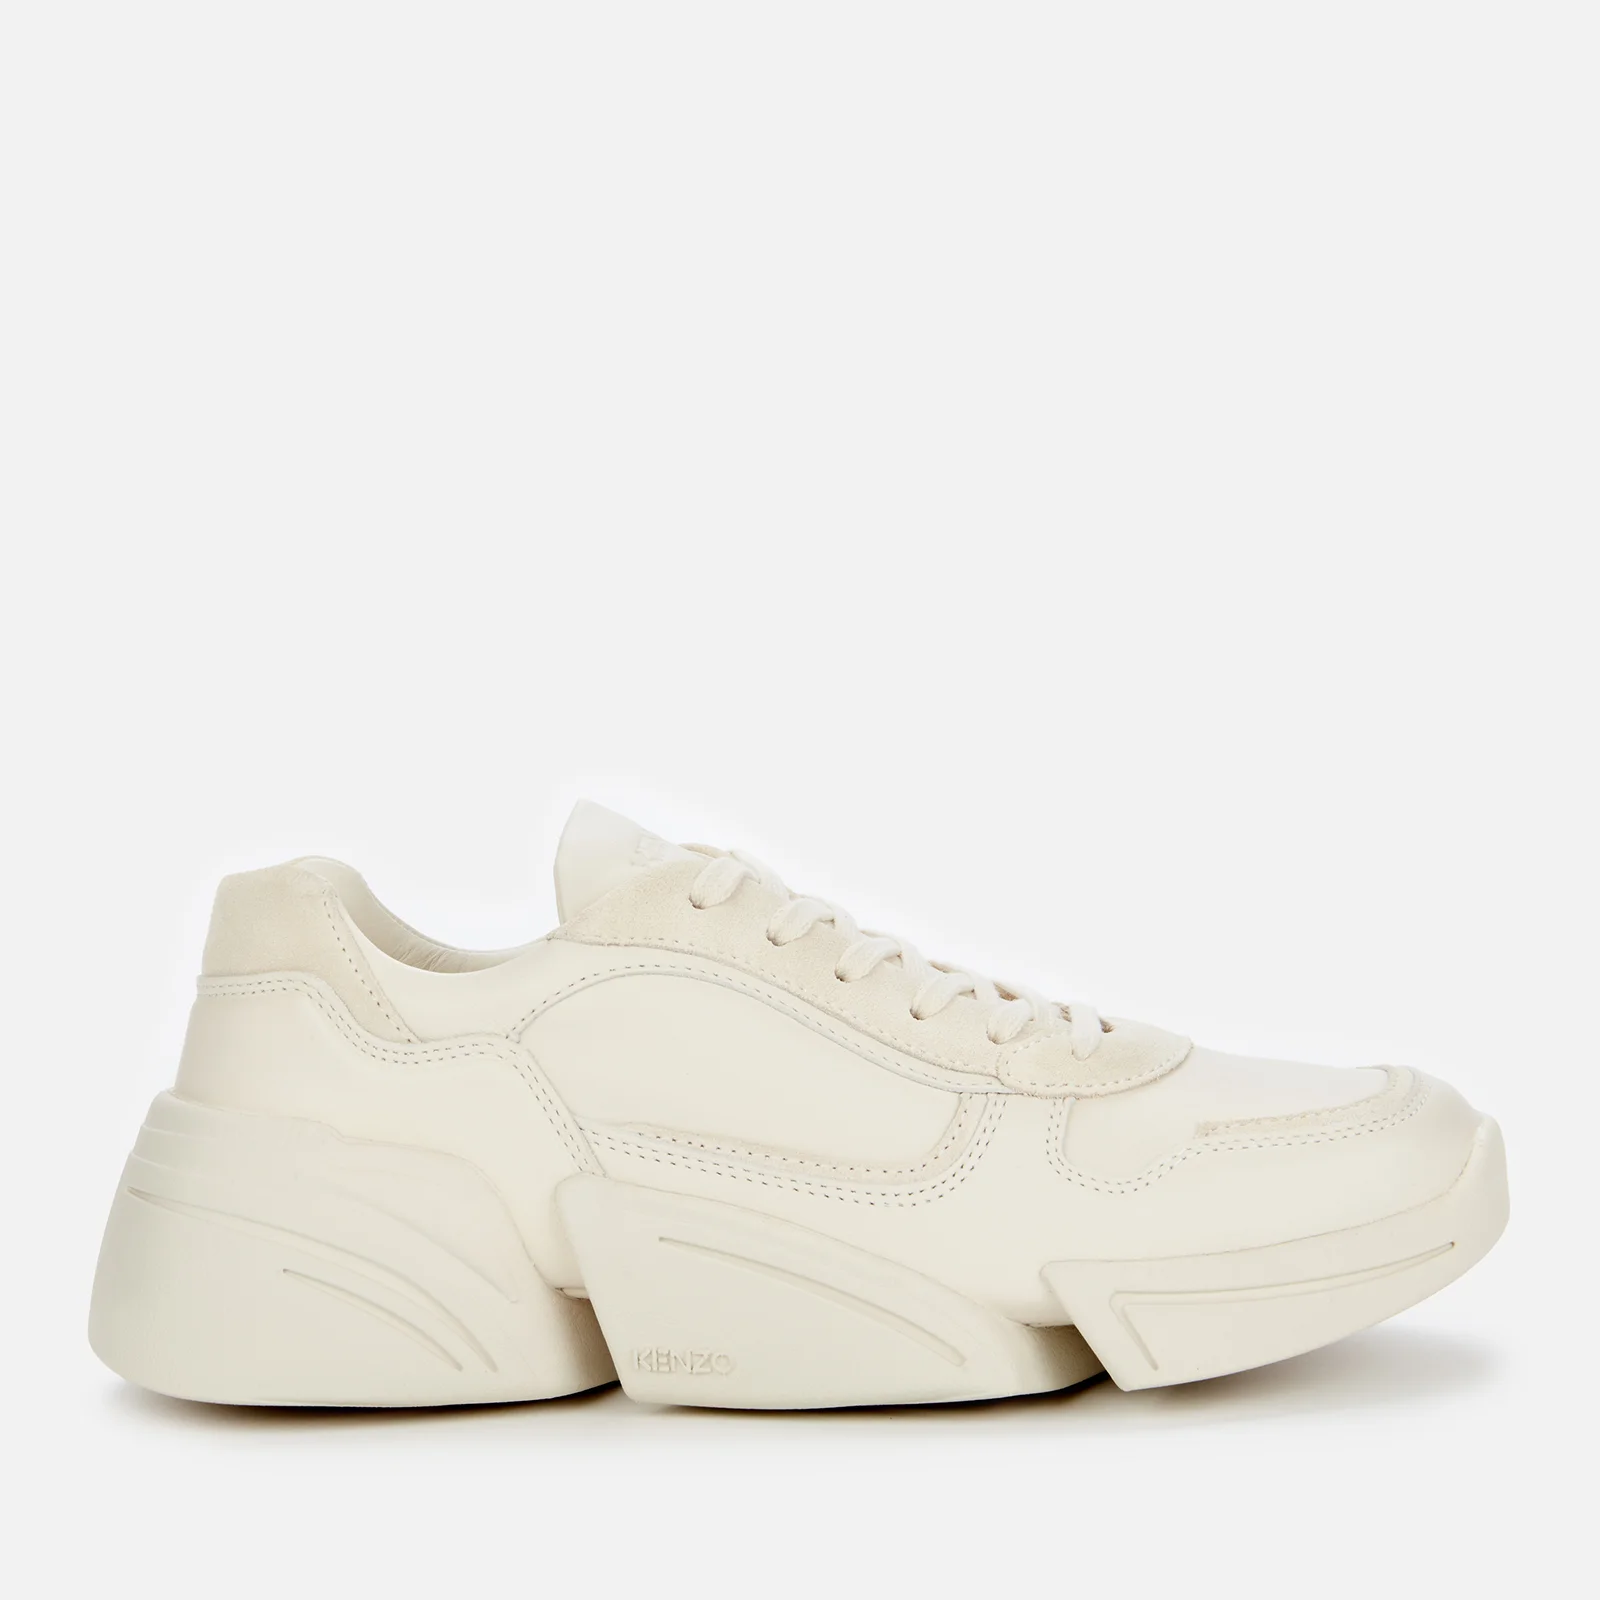 KENZO Women's Kross Leather Low Top Trainers - Off White Image 1